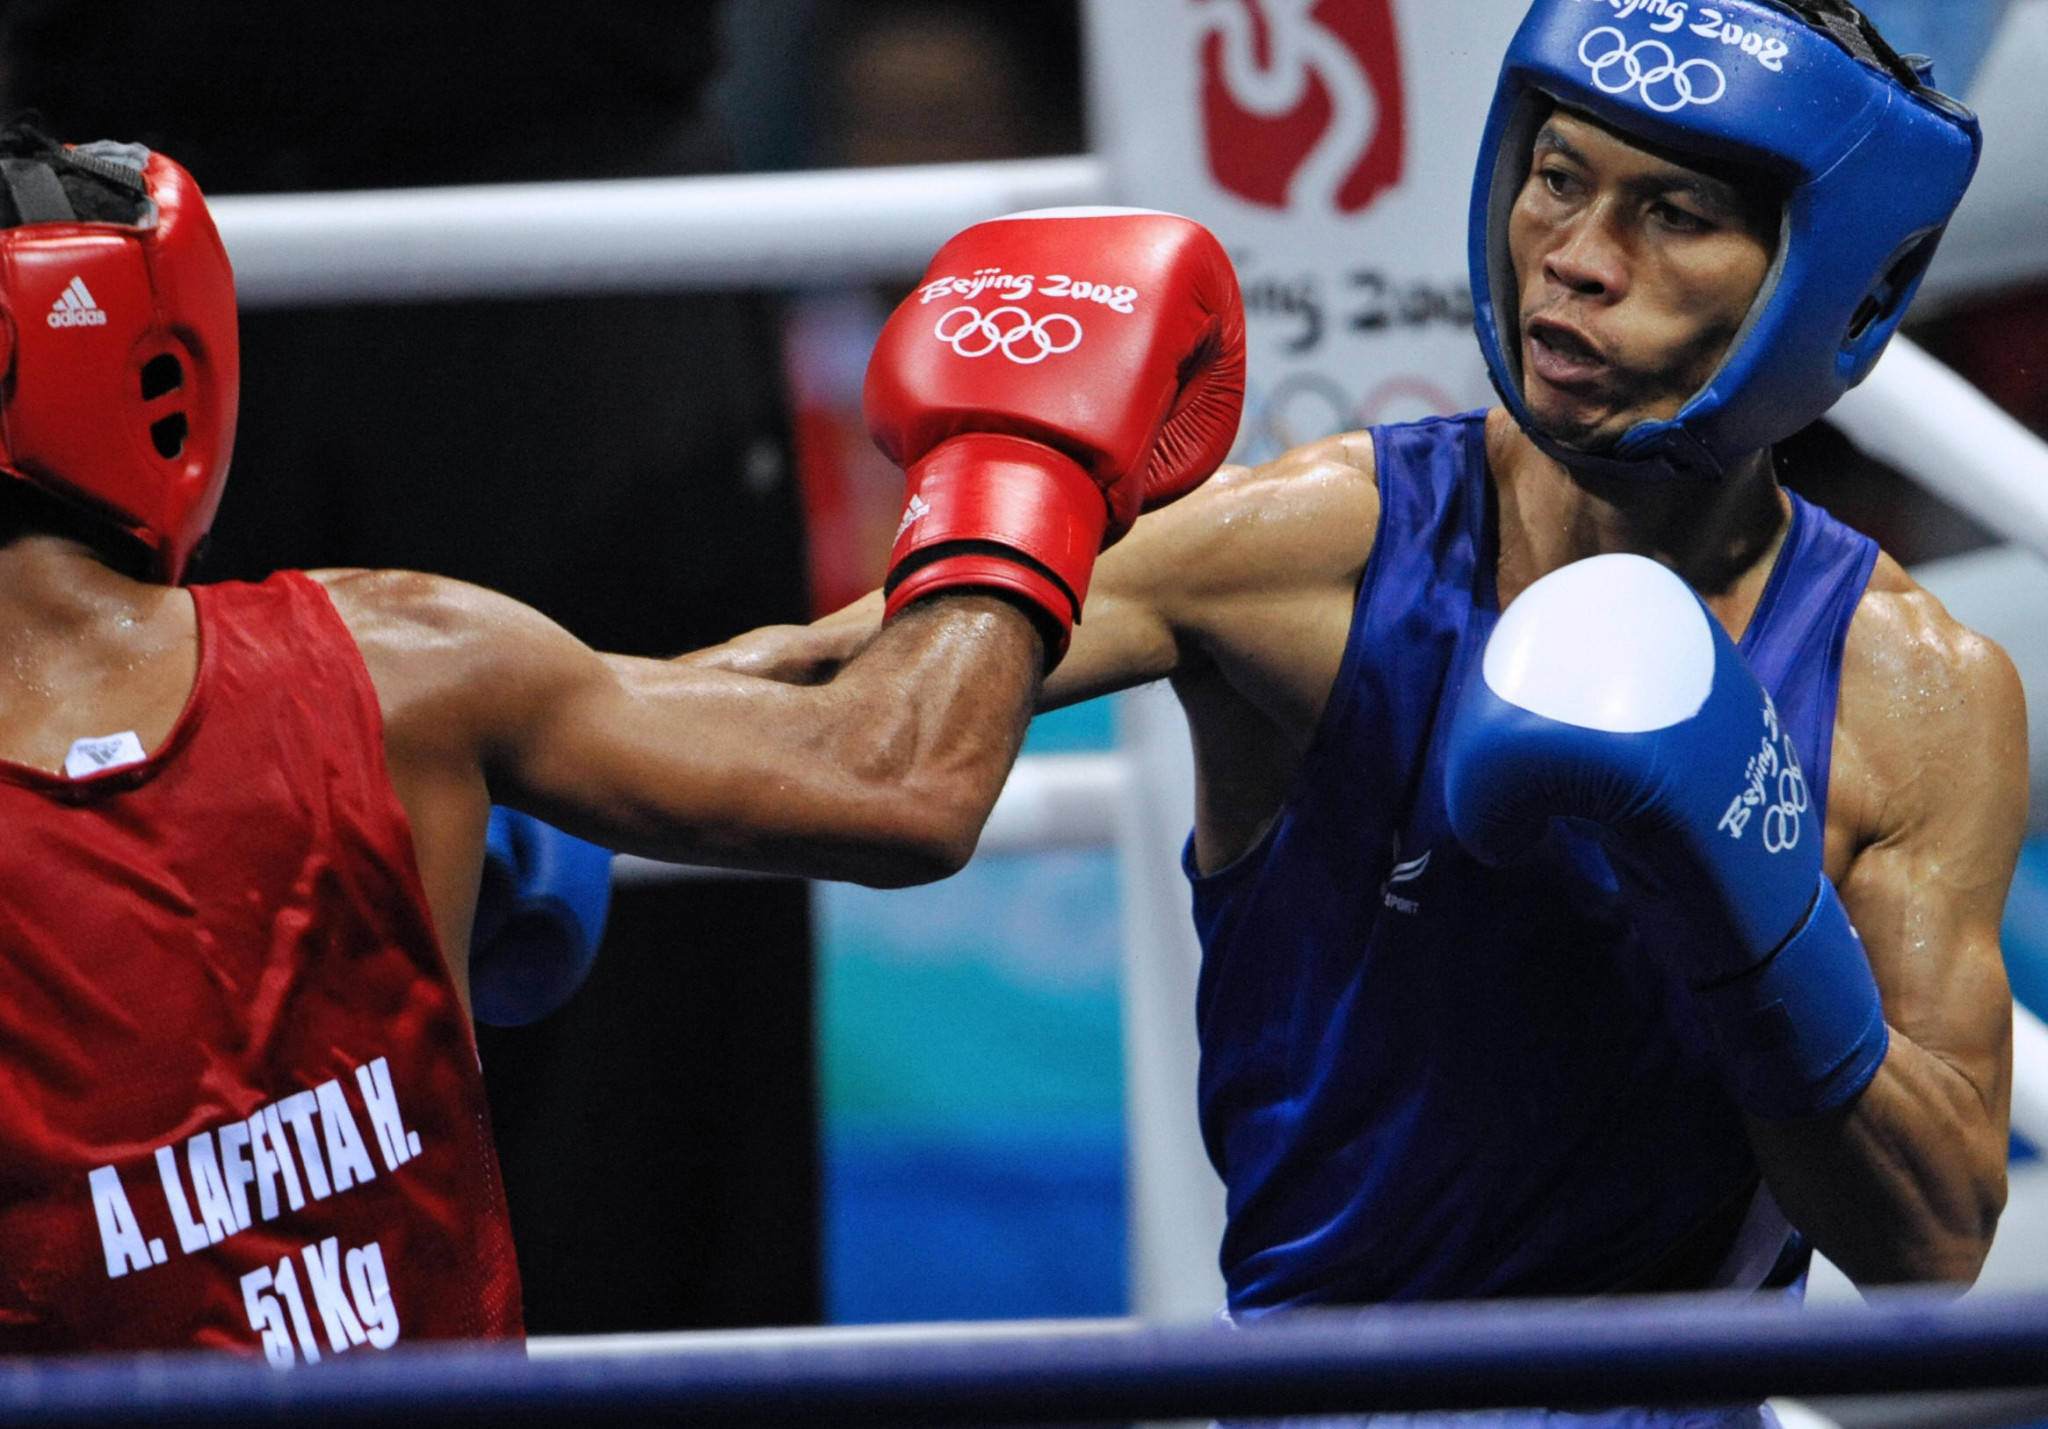 Somjit Jongjohor won Thailand's last Olympic gold medal, when he claimed victory in the men's flyweight division at Beijing 2008, the fourth consecutive Games the country had topped the podium ©Getty Images